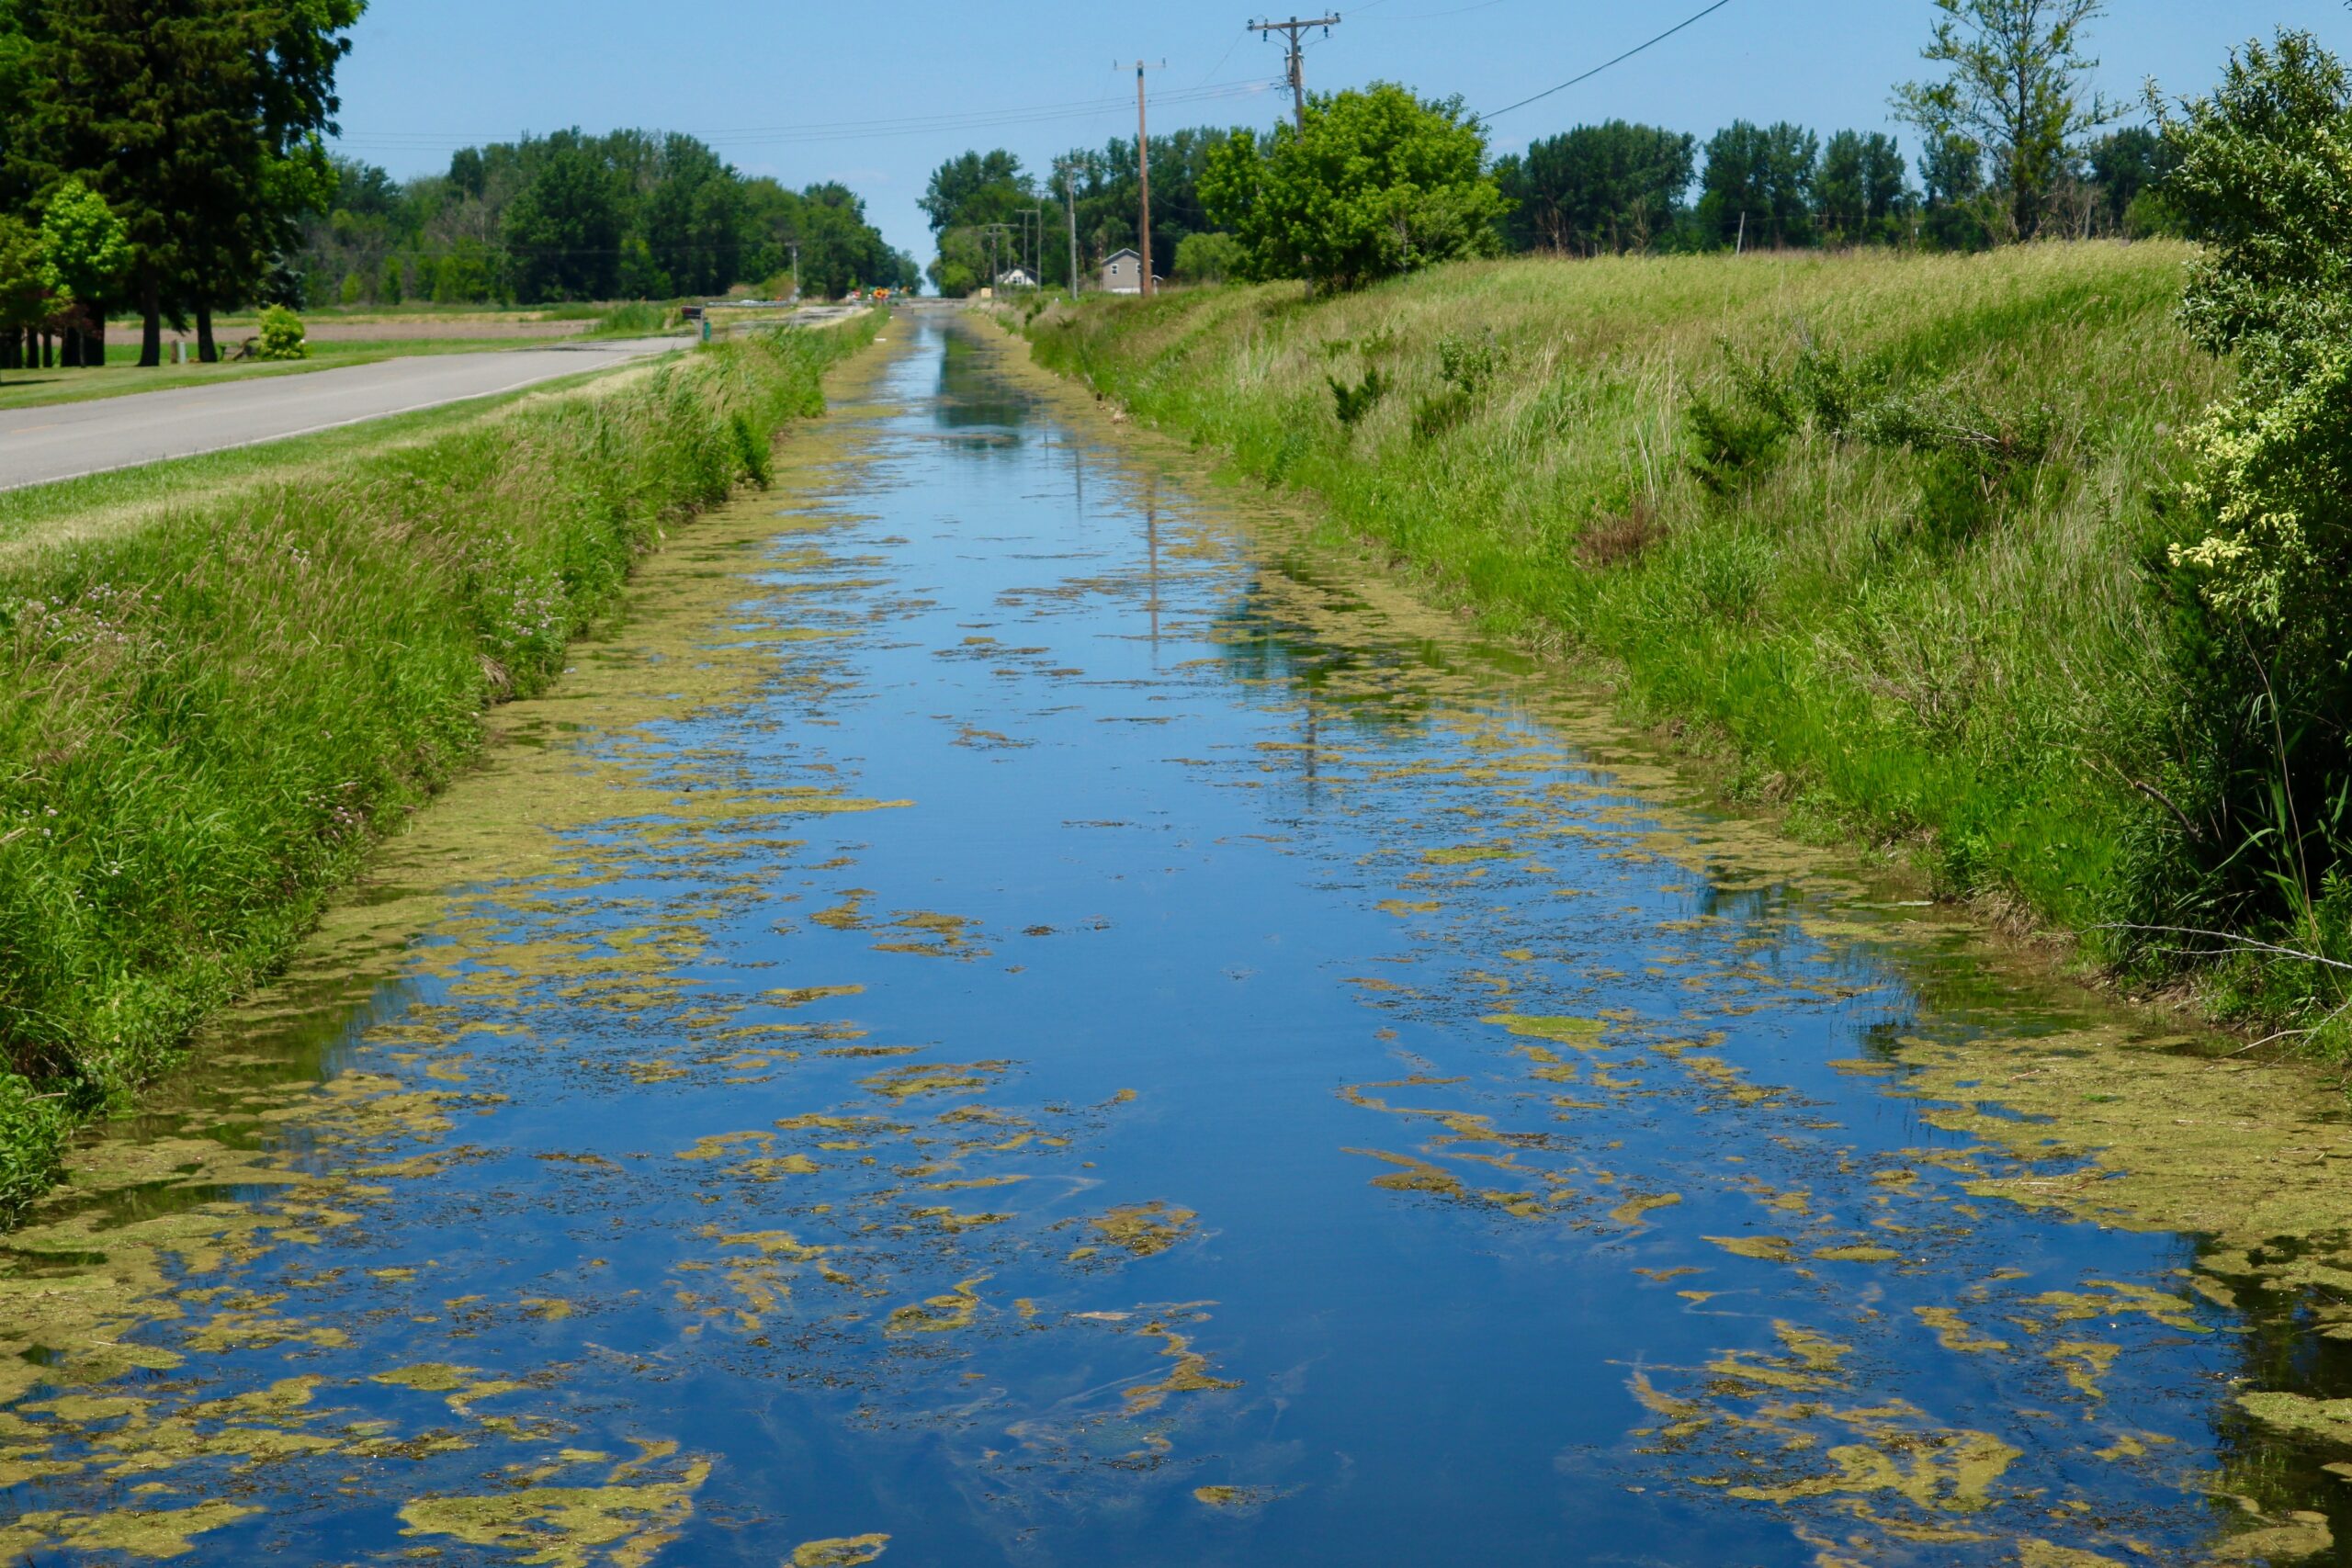 Agriculture Evades Accountability, Responsibility for America’s Worst Water Pollution